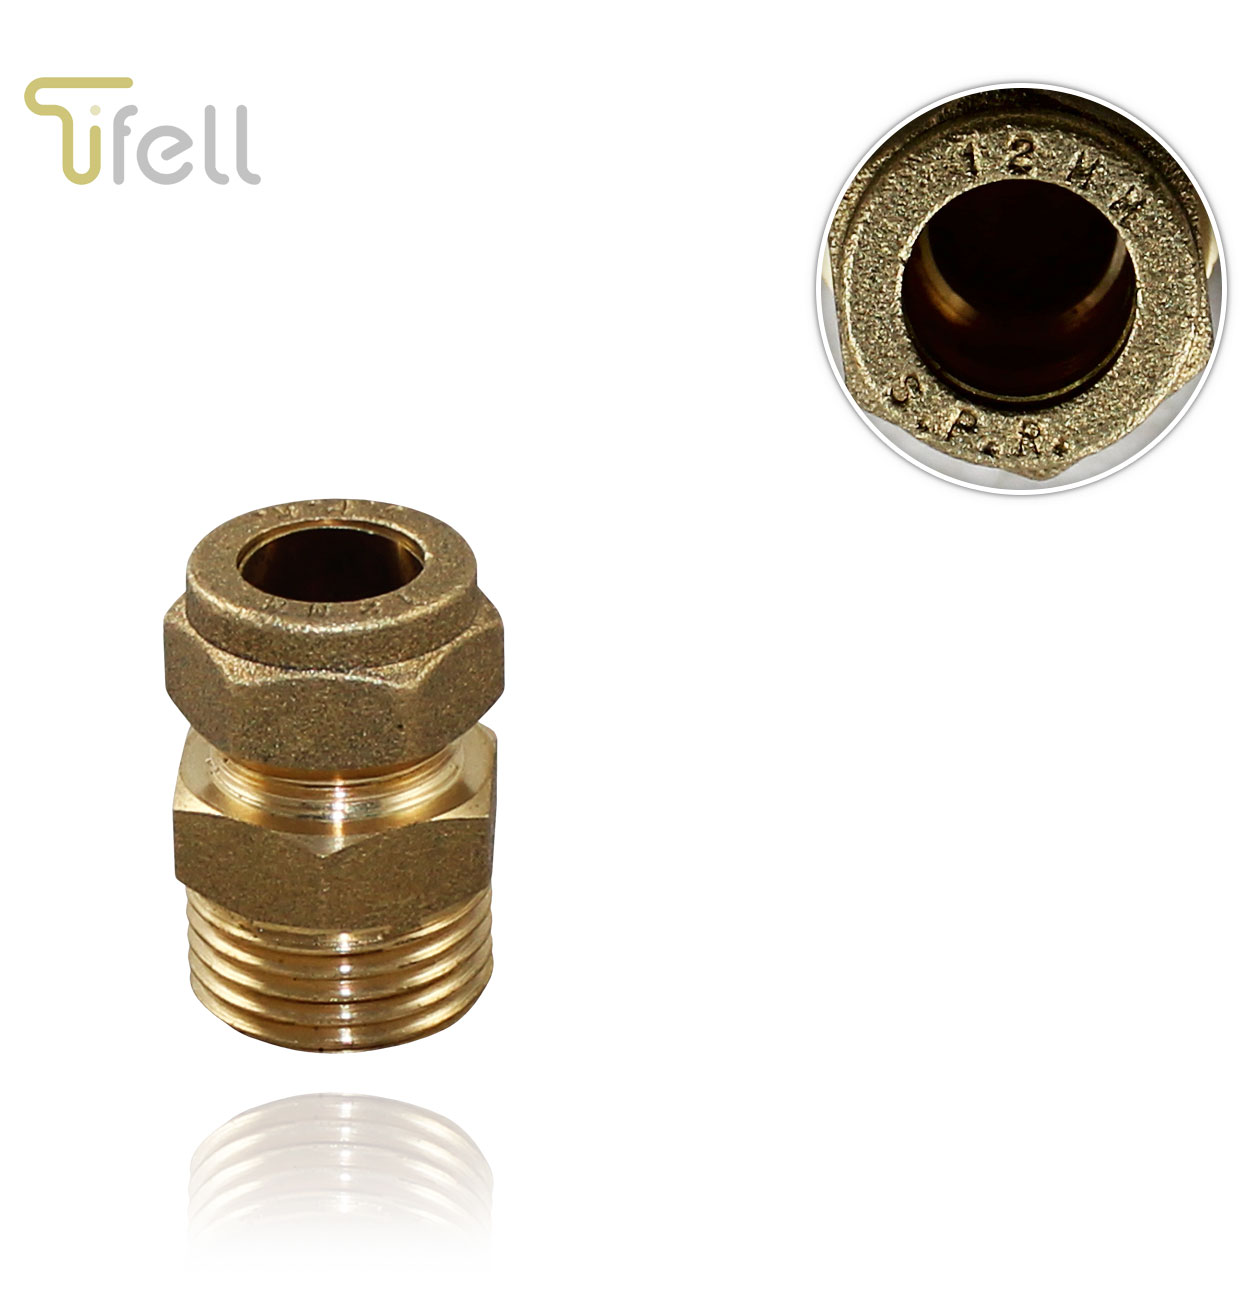 RACOR RECTO 1/2M-12 COMPRESION TIFELL SECUFELL